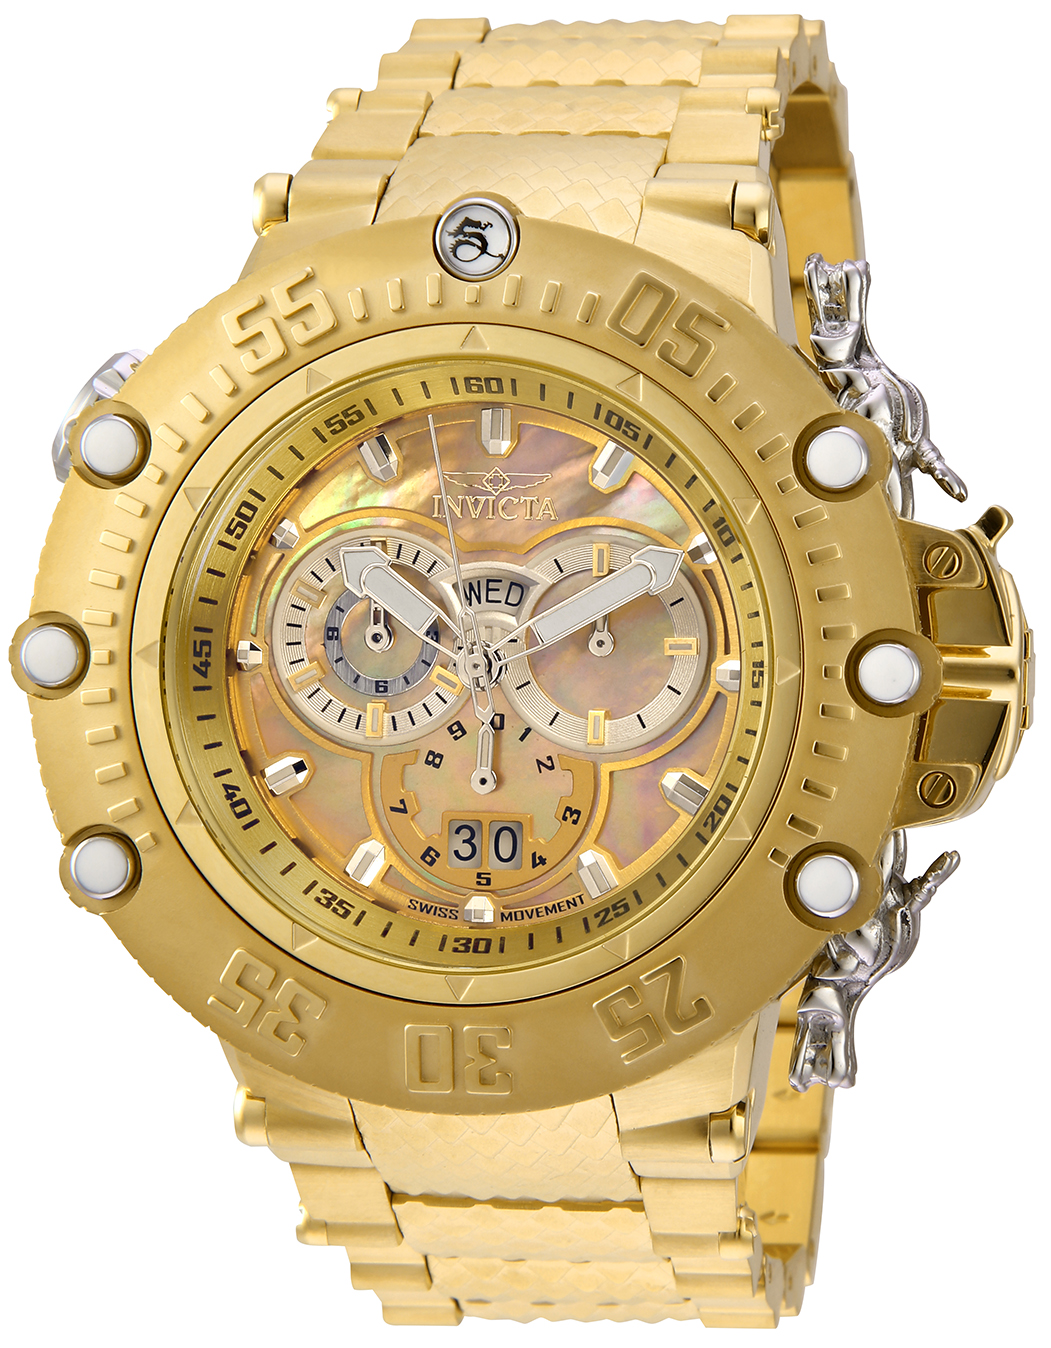 Invicta Subaqua SHUTTER  Men's Watch w/ Metal, Mother of Pearl & Oyster Dial - 52mm, Gold (32950)